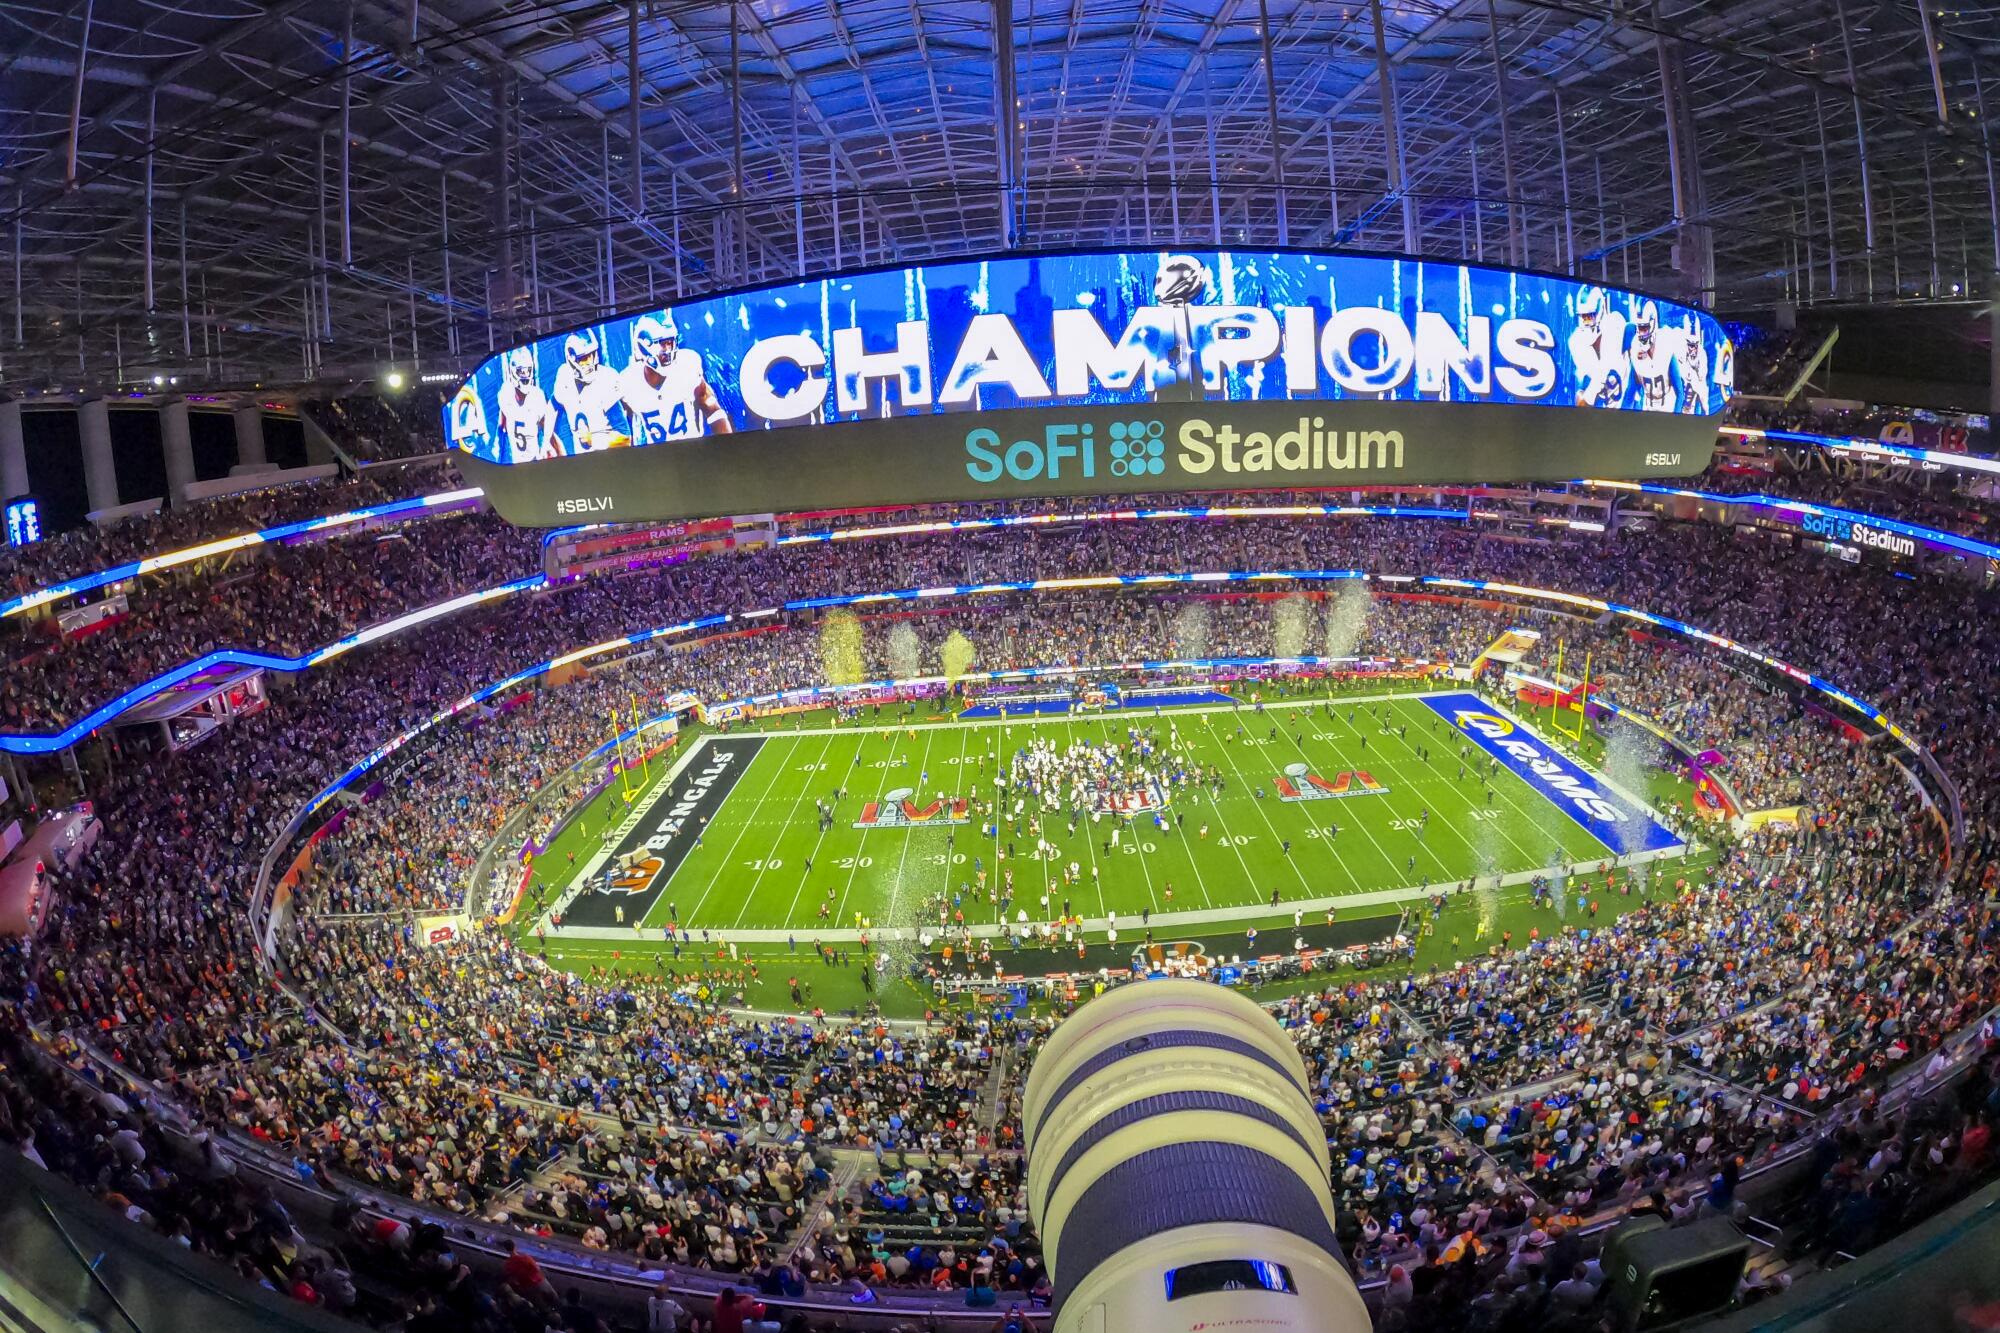 Behind the Lens: My favorite Super Bowl photo - Los Angeles Times